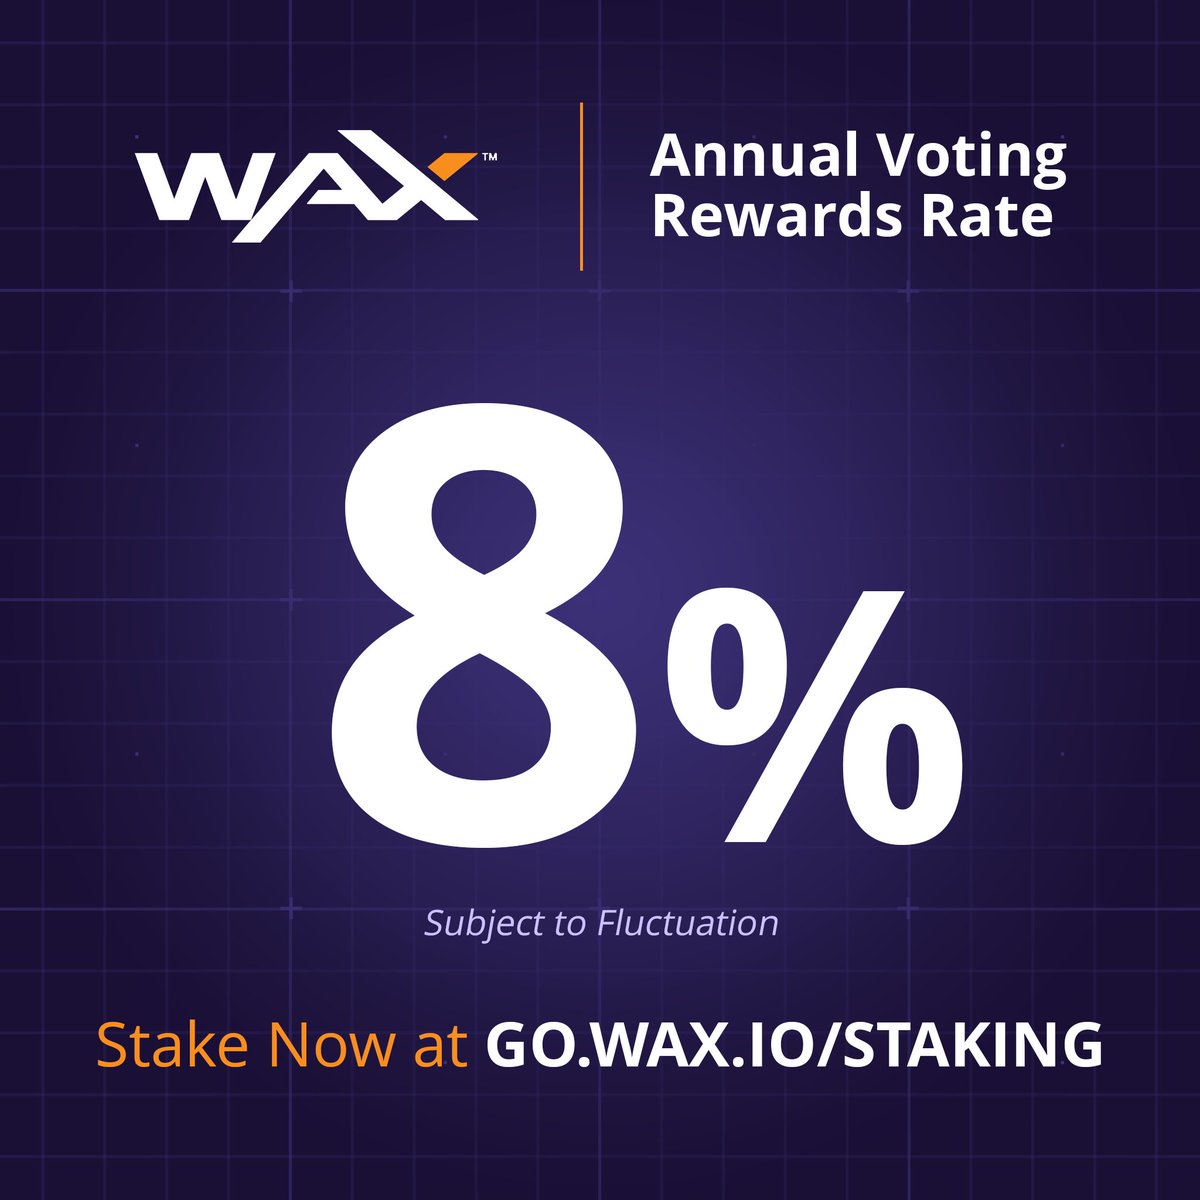 🪙 Annual Voting Rewards Rate currently sits a ~8% Support the WAX #NFT ecosystem & earn $WAXP on top. Stake for chain resources like NET & CPU & vote on block producers! Ready for extra $WAXP in your wallet? Stake Now at go.wax.io/staking.